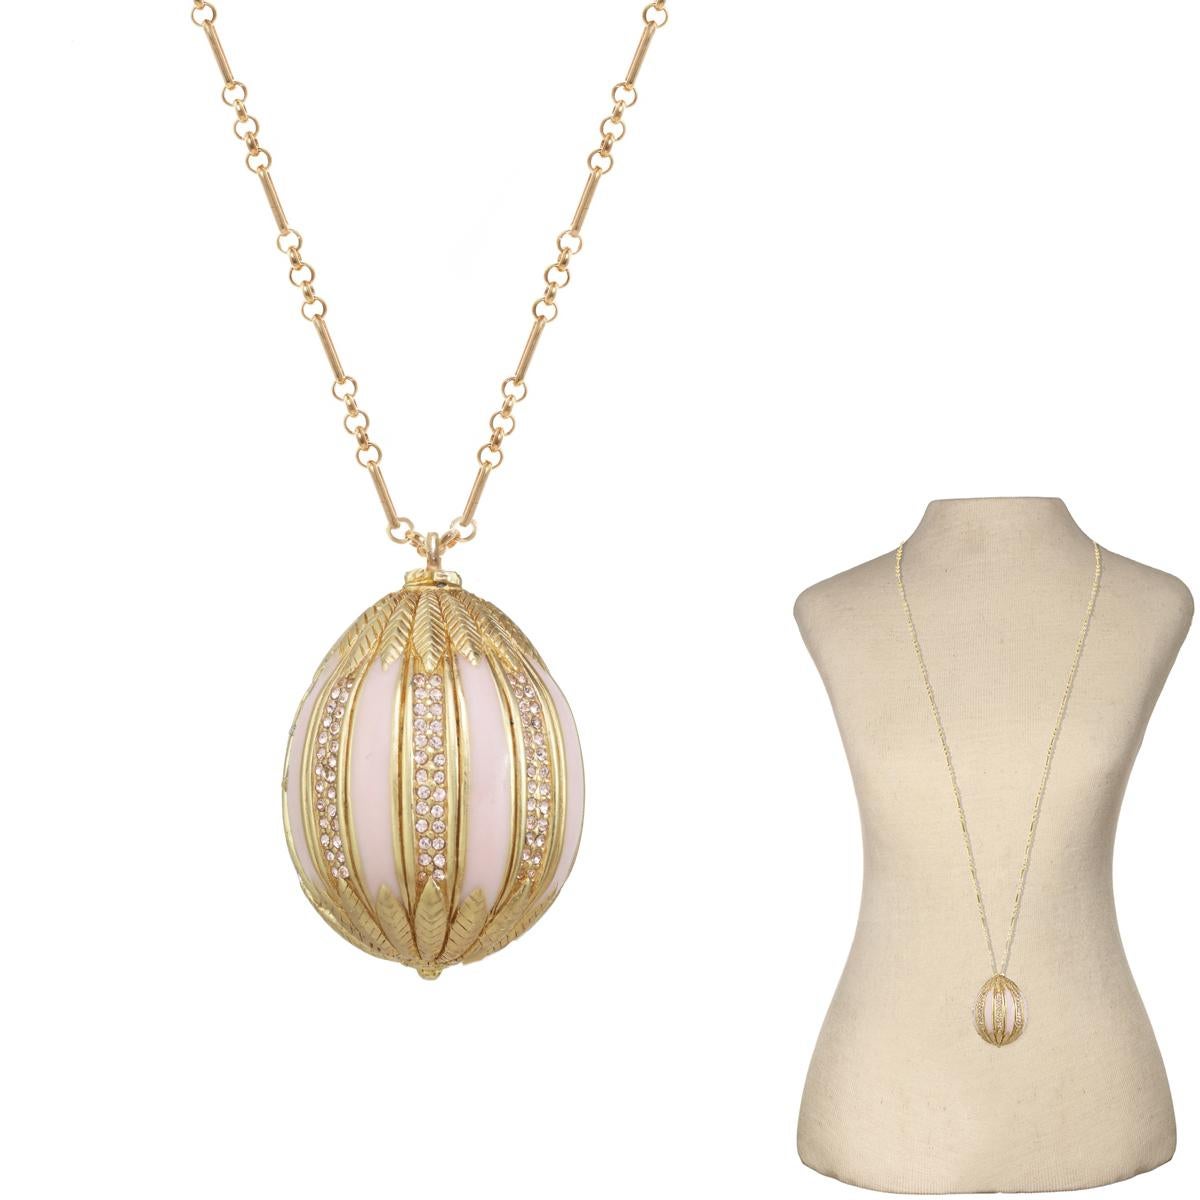 CINER is a made-to-order house, please allow 10 business days for our artisans to make your jewelry for you!

A gorgeous egg pendant, this statement piece is the perfect layering necklace and also stuns when worn alone.

Materials:
18K Gold